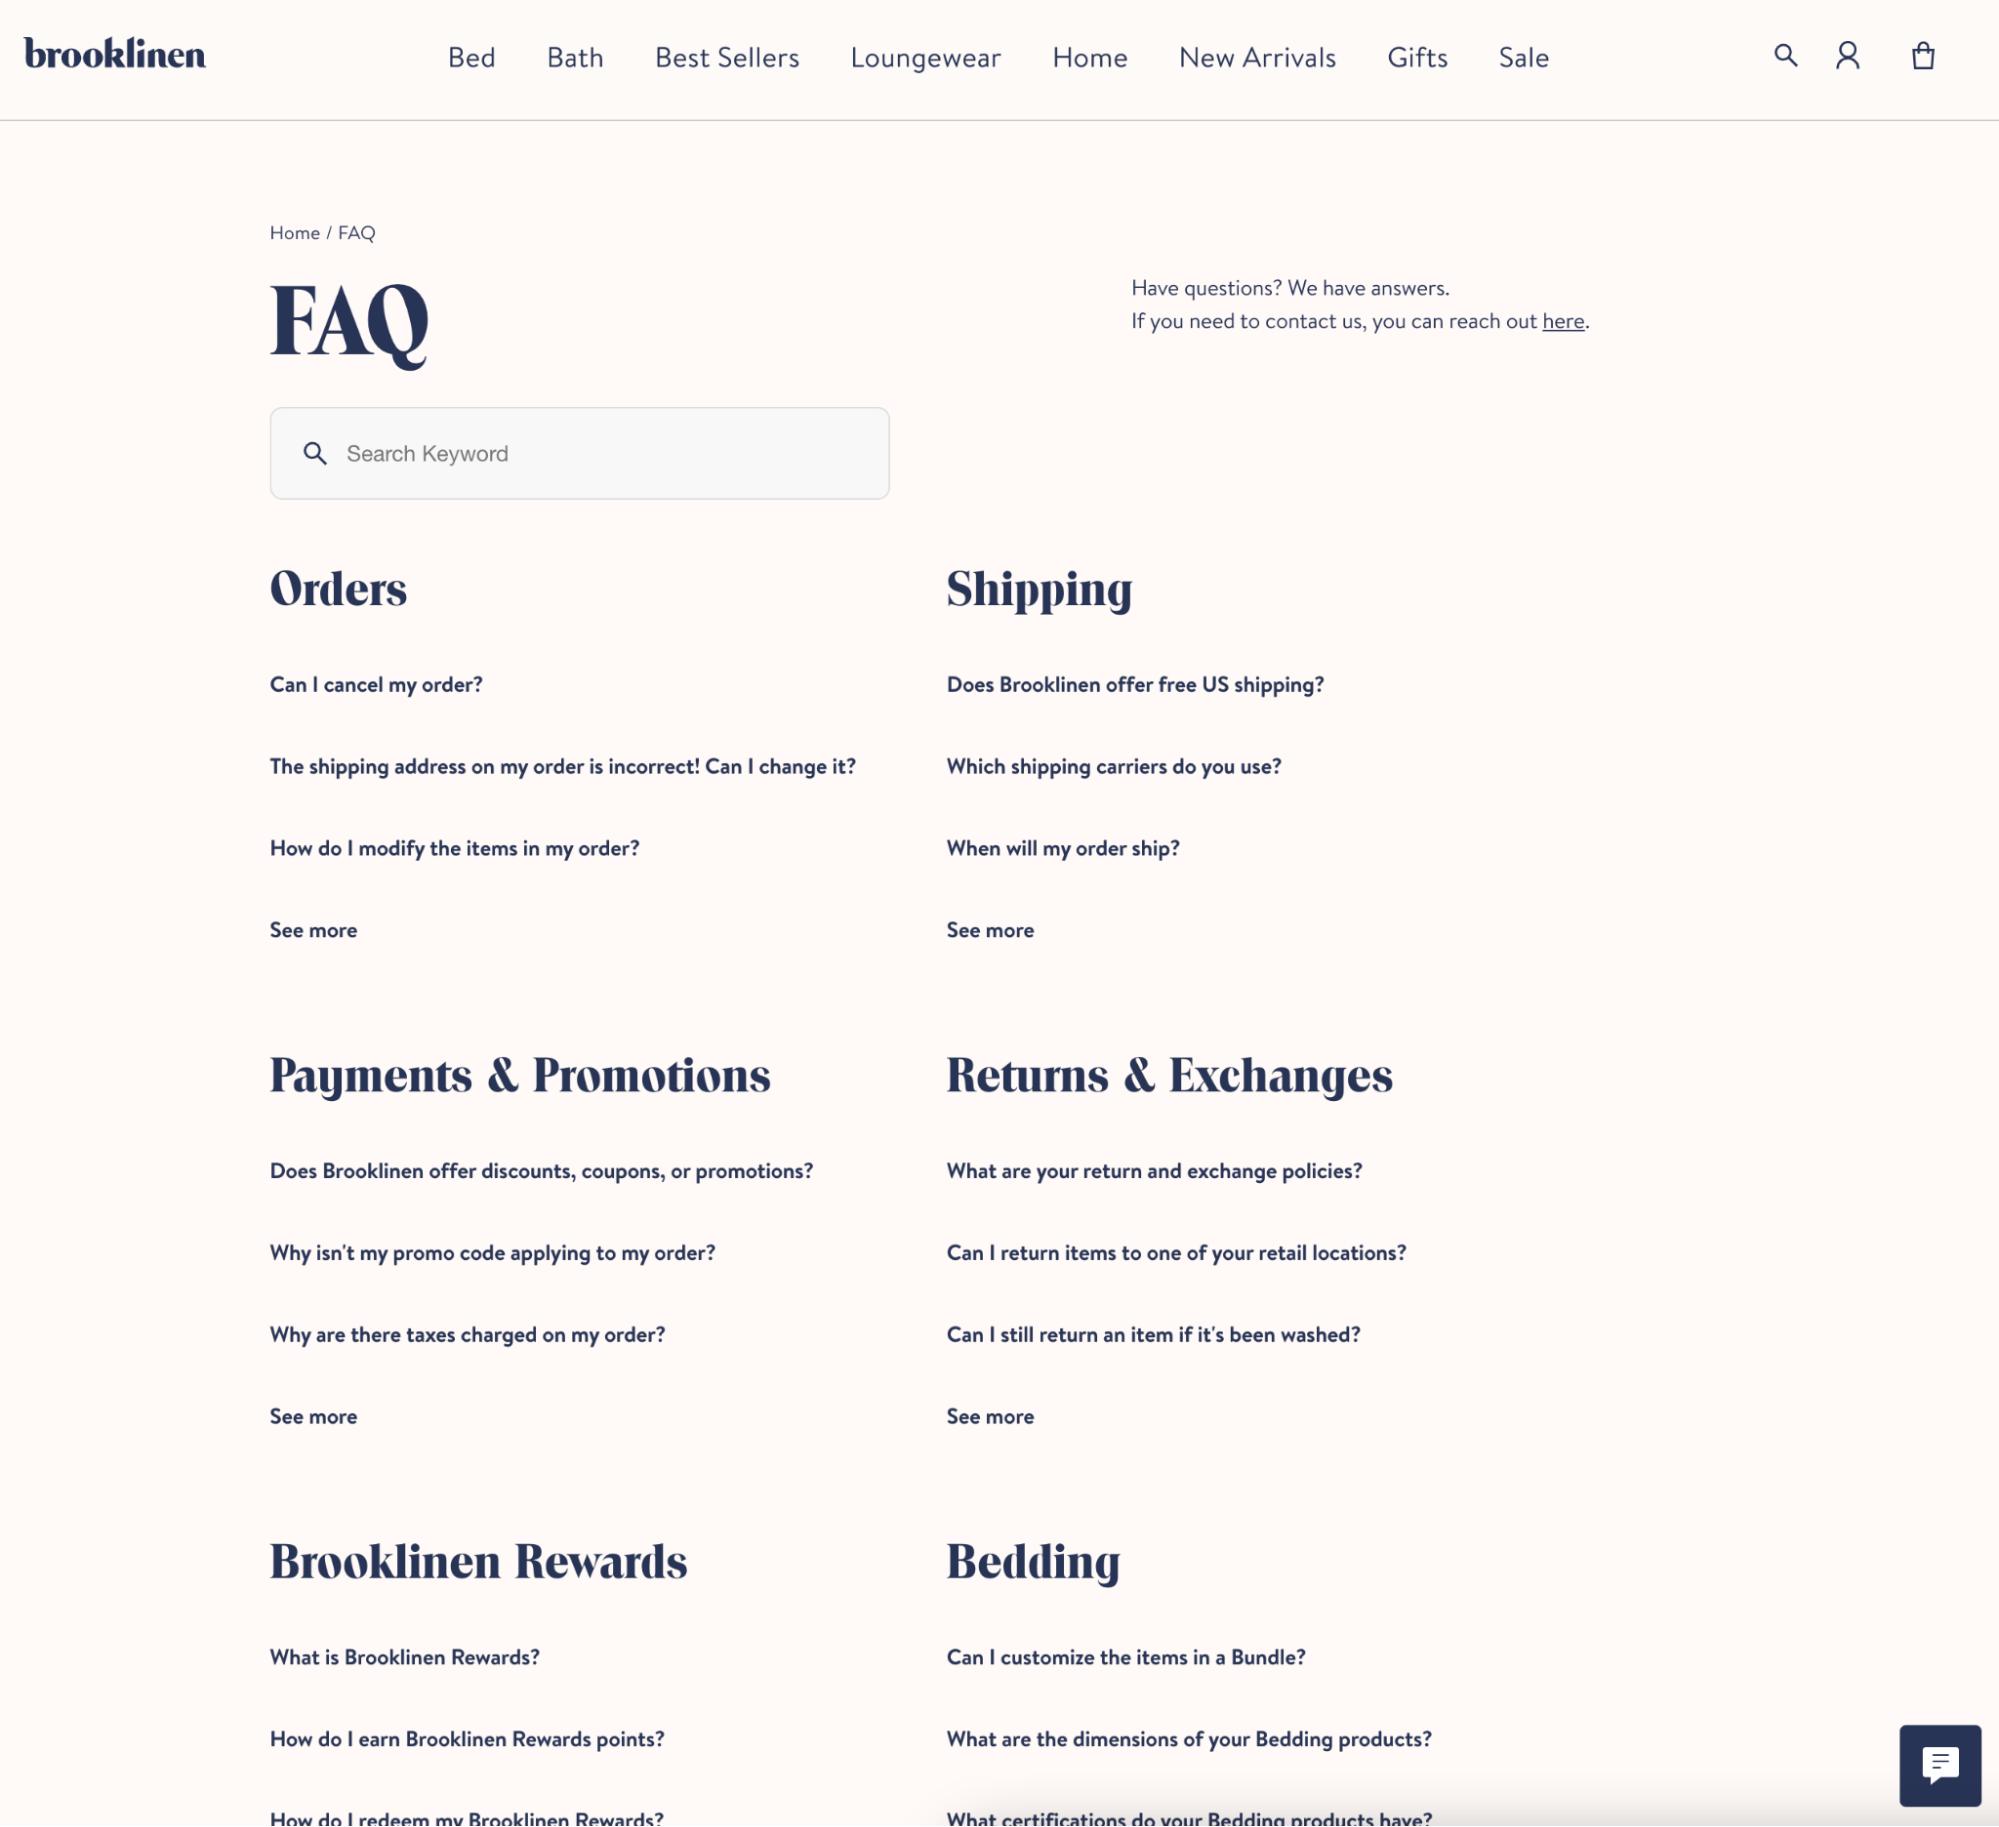 Brooklinen’s branded FAQ page with simple questions and see more links.